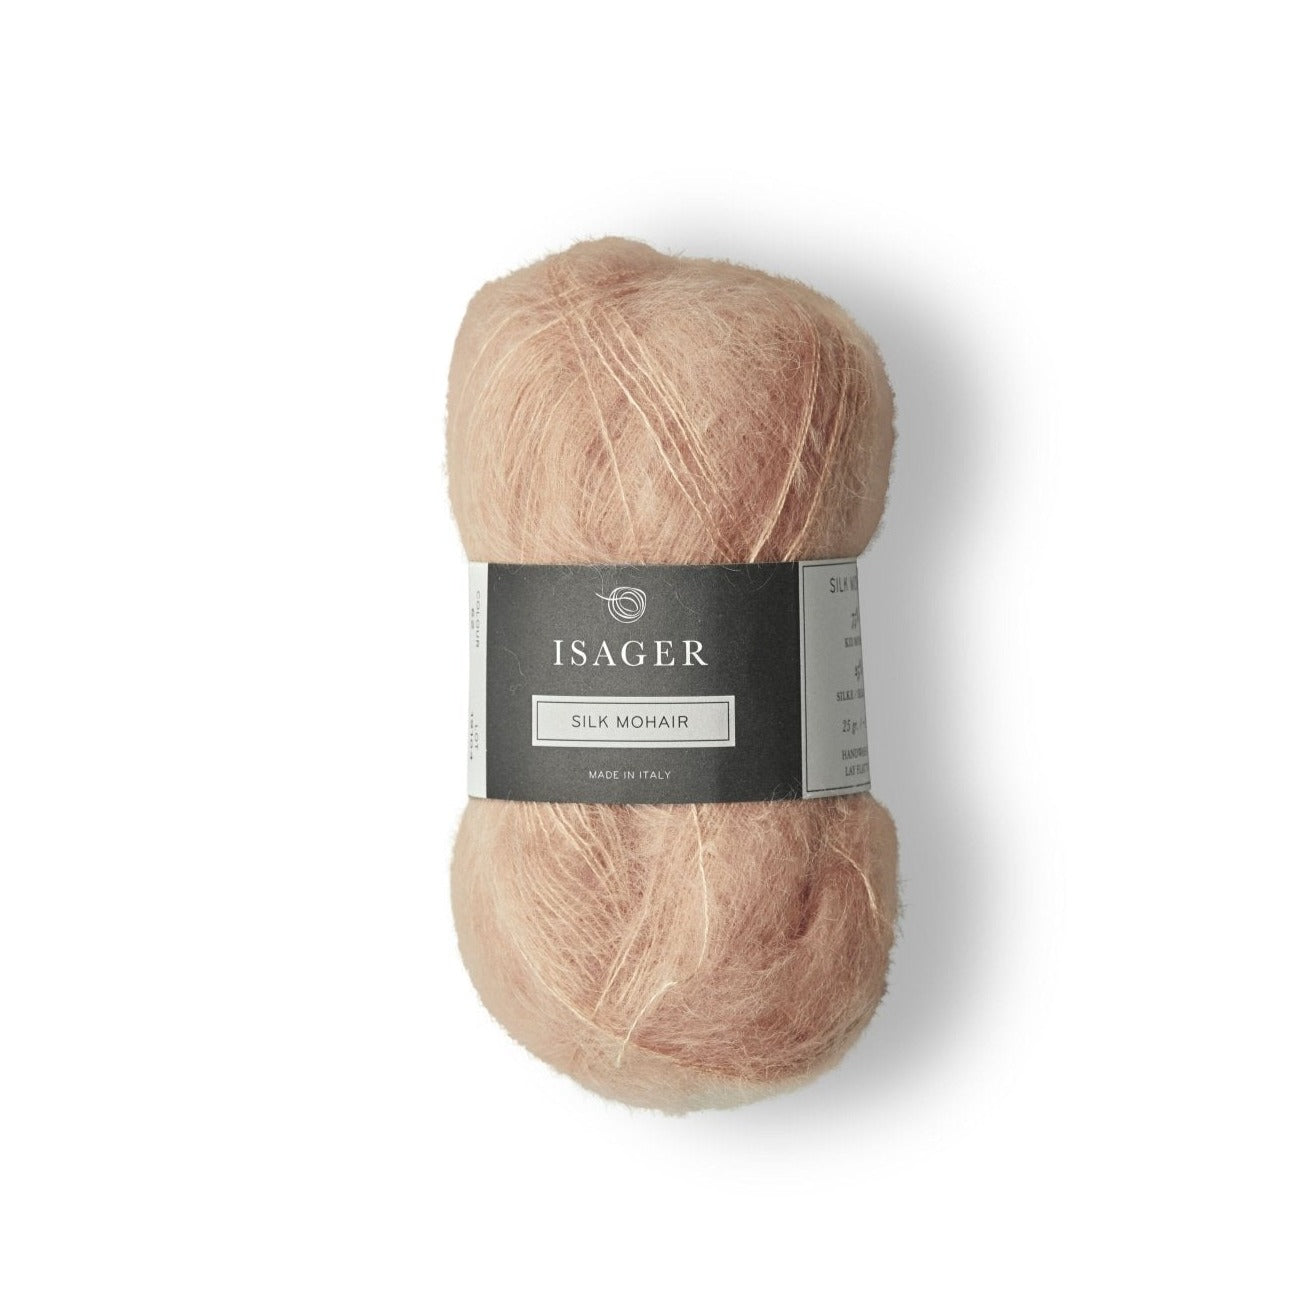 Isager Silk Mohair - 62 - 2 Ply - Isager - The Little Yarn Store